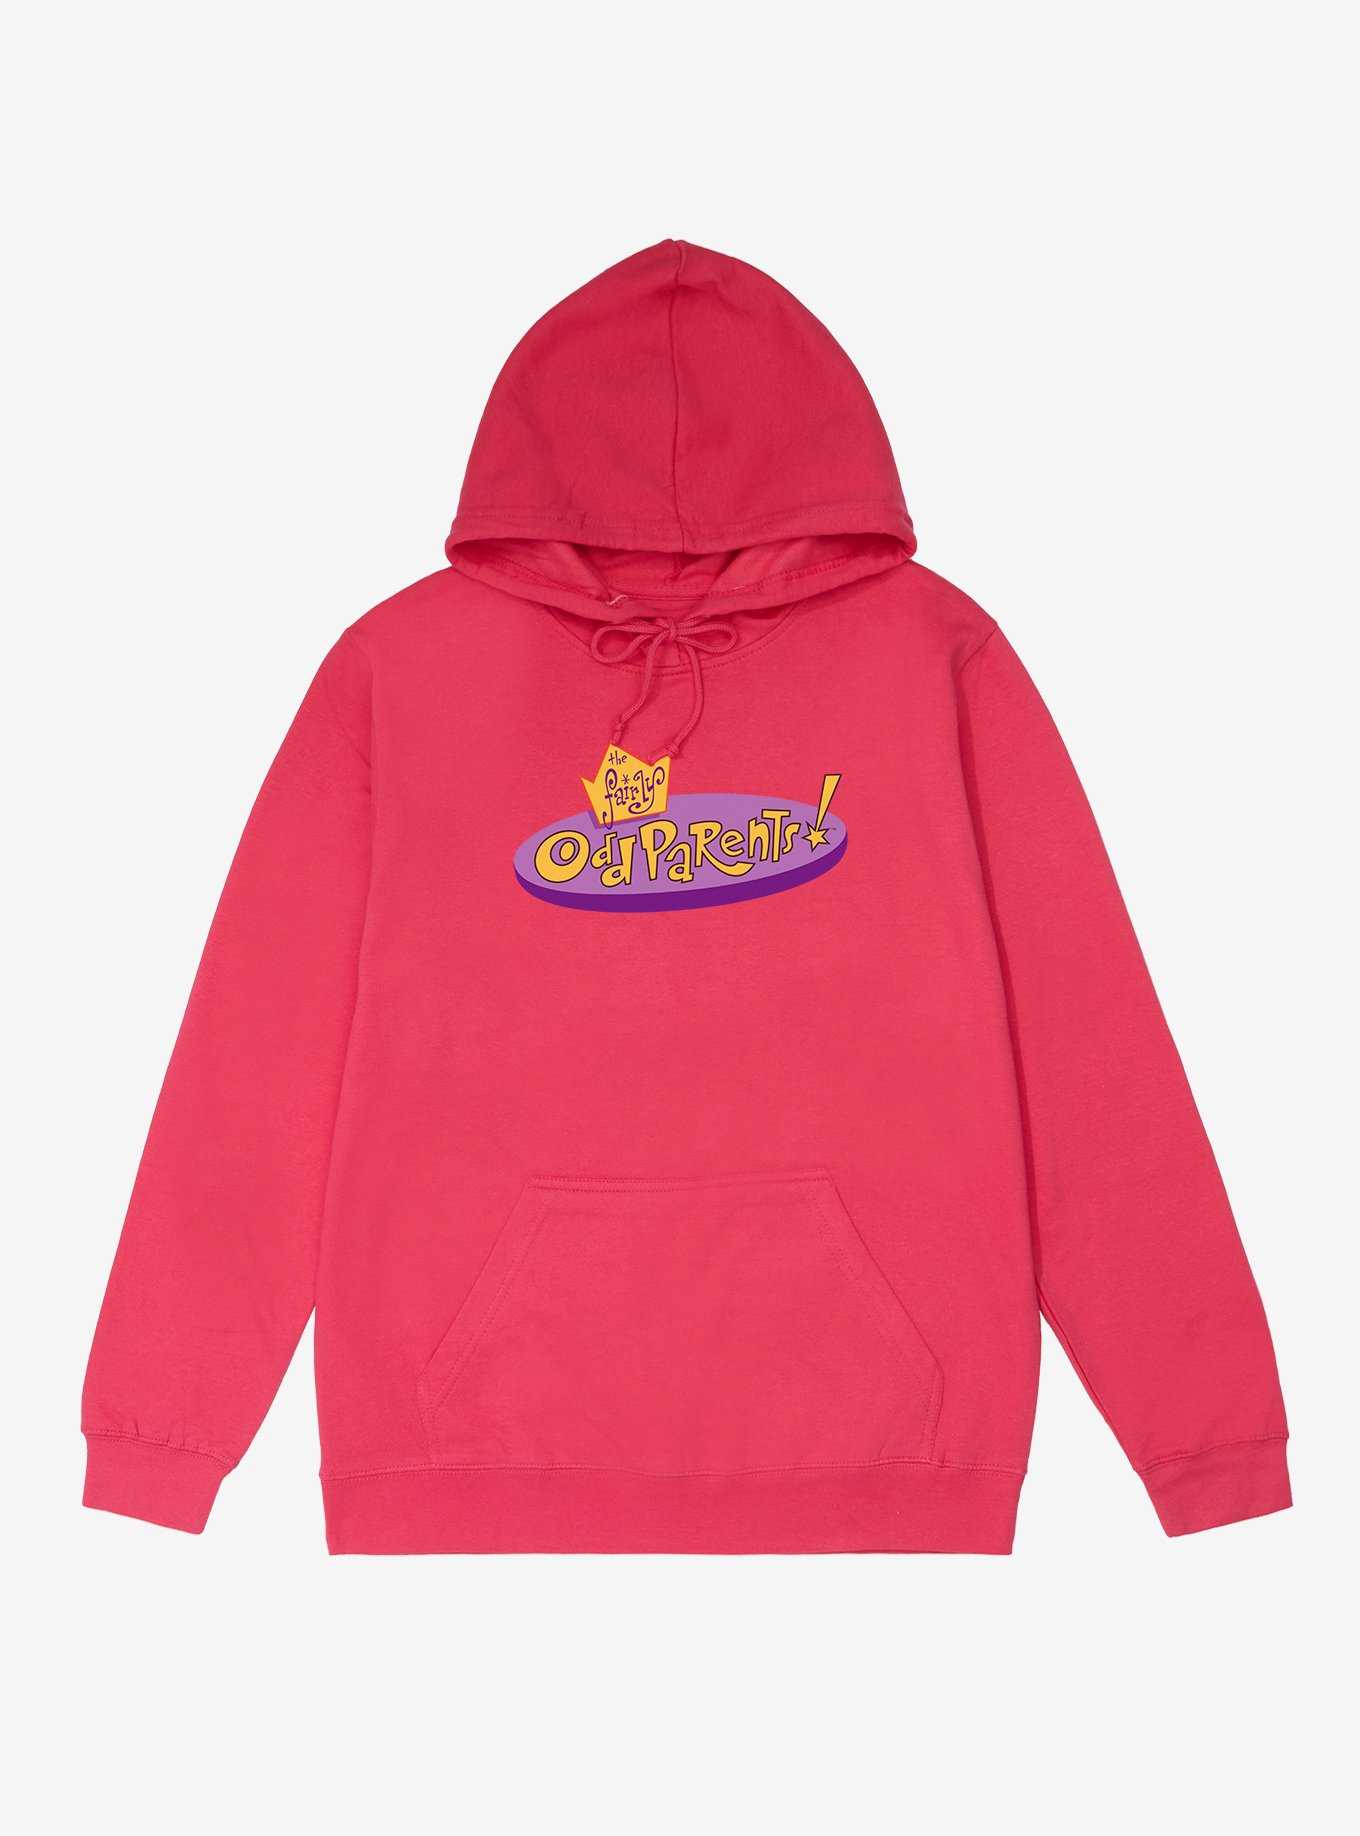 The Fairly OddParents The Fairly OddParents Logo French Terry Hoodie, , hi-res